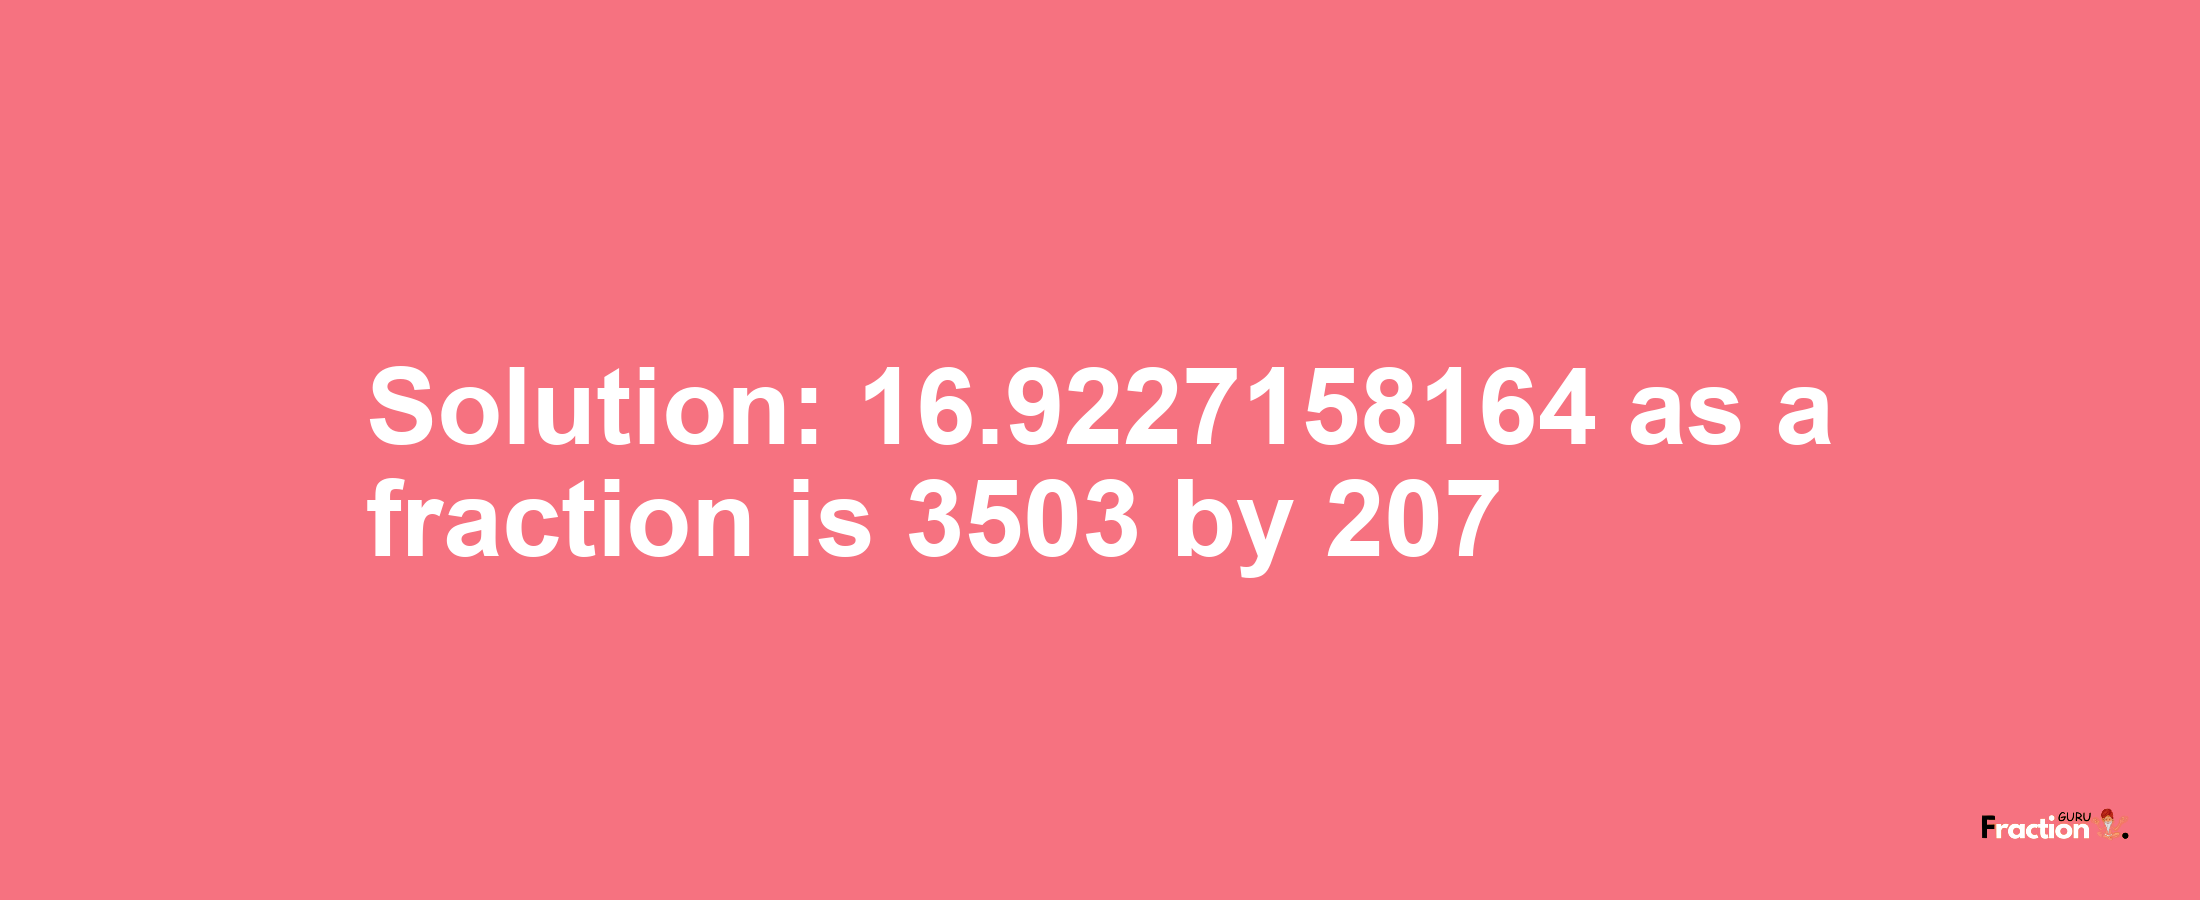 Solution:16.9227158164 as a fraction is 3503/207